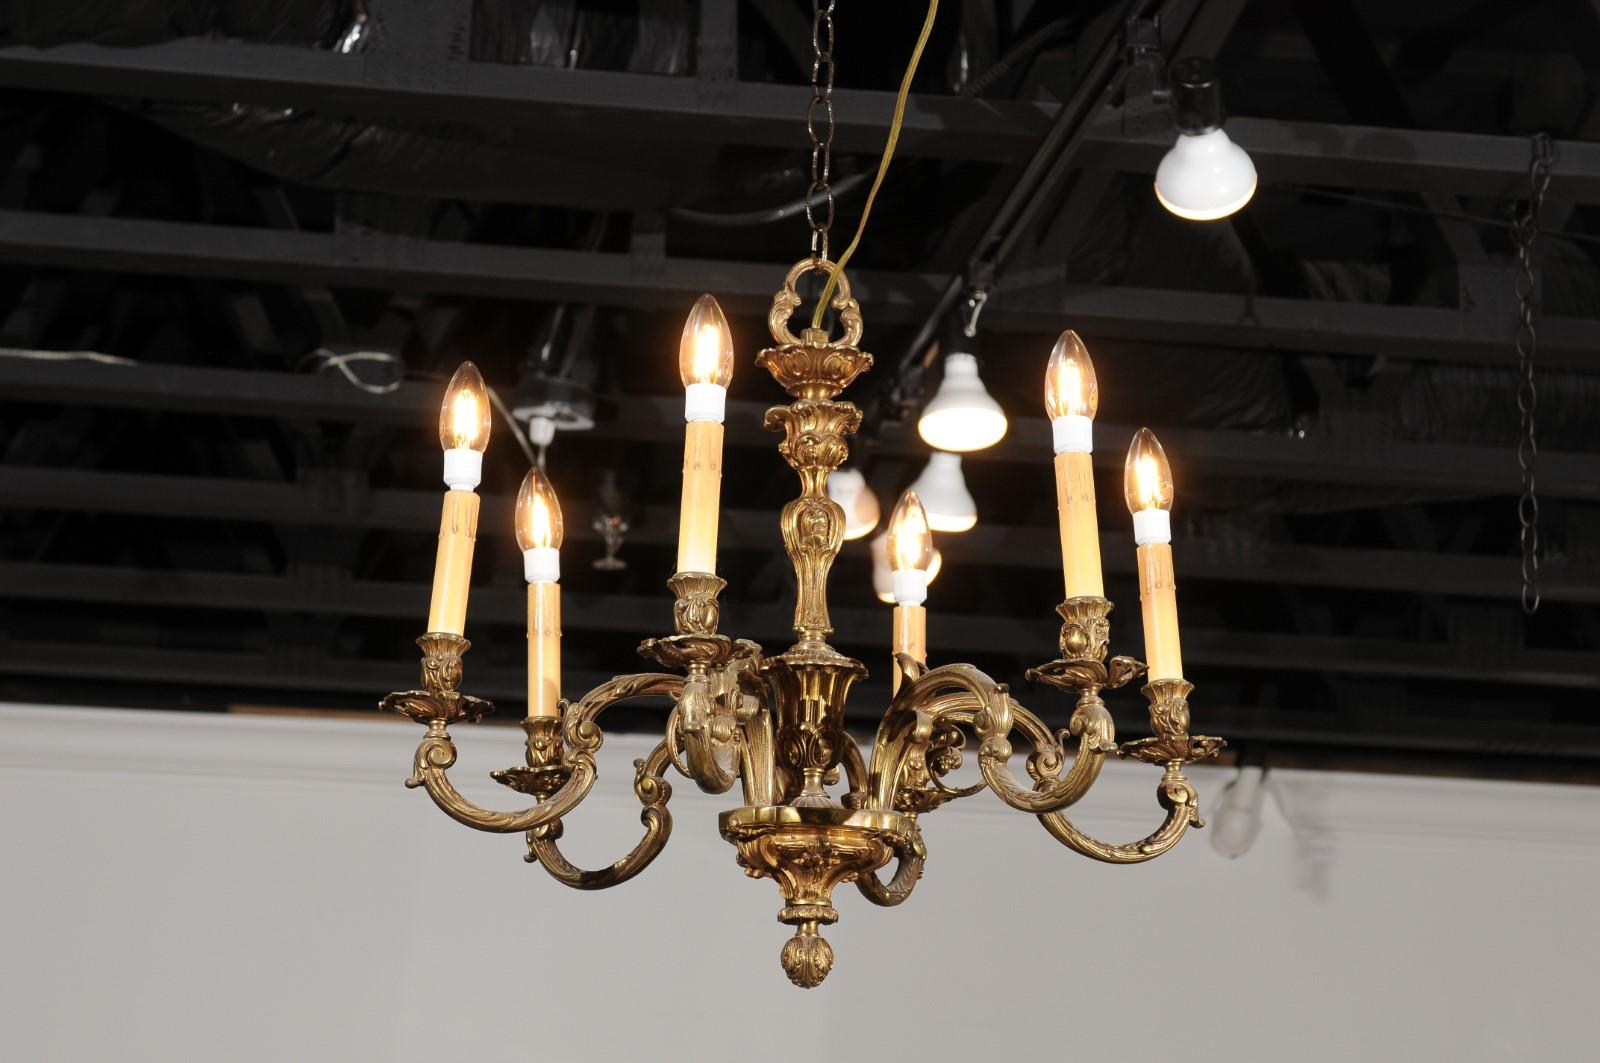 A French six-light bronze chandelier from the 19th century, with foliage motifs and scrolling arms. Created in France during the 19th century, this bronze chandelier features a central column adorned with foliage and connected to six C-scrolls arms